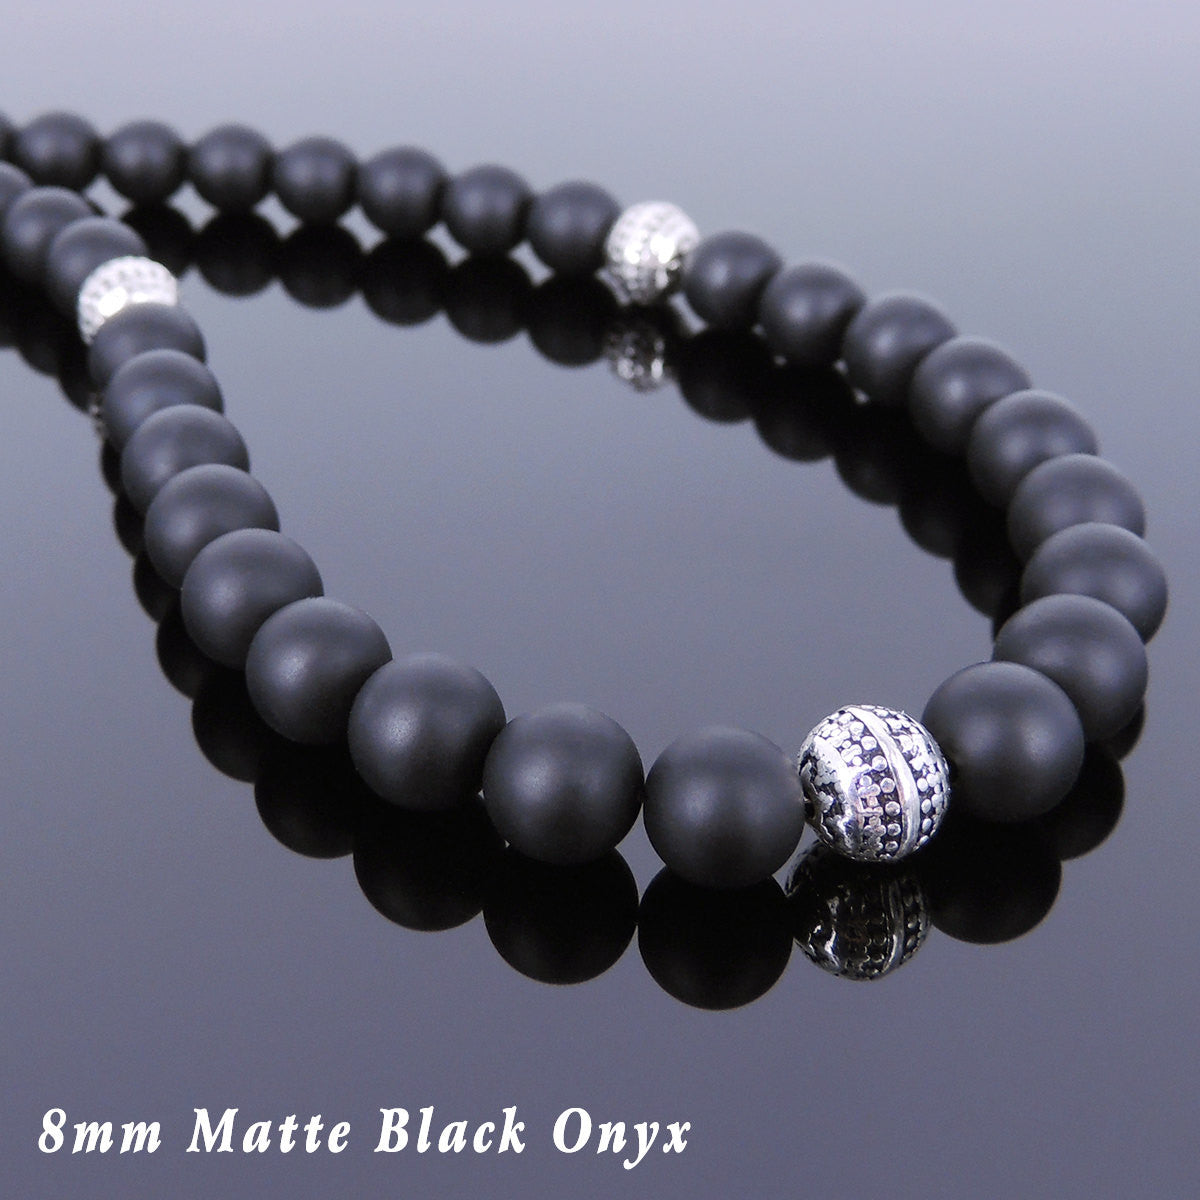 8mm Matte Black Onyx Healing Gemstone Necklace with S925 Sterling Silver Artisan Beads & S-Hook Clasp - Handmade by Gem & Silver NK117